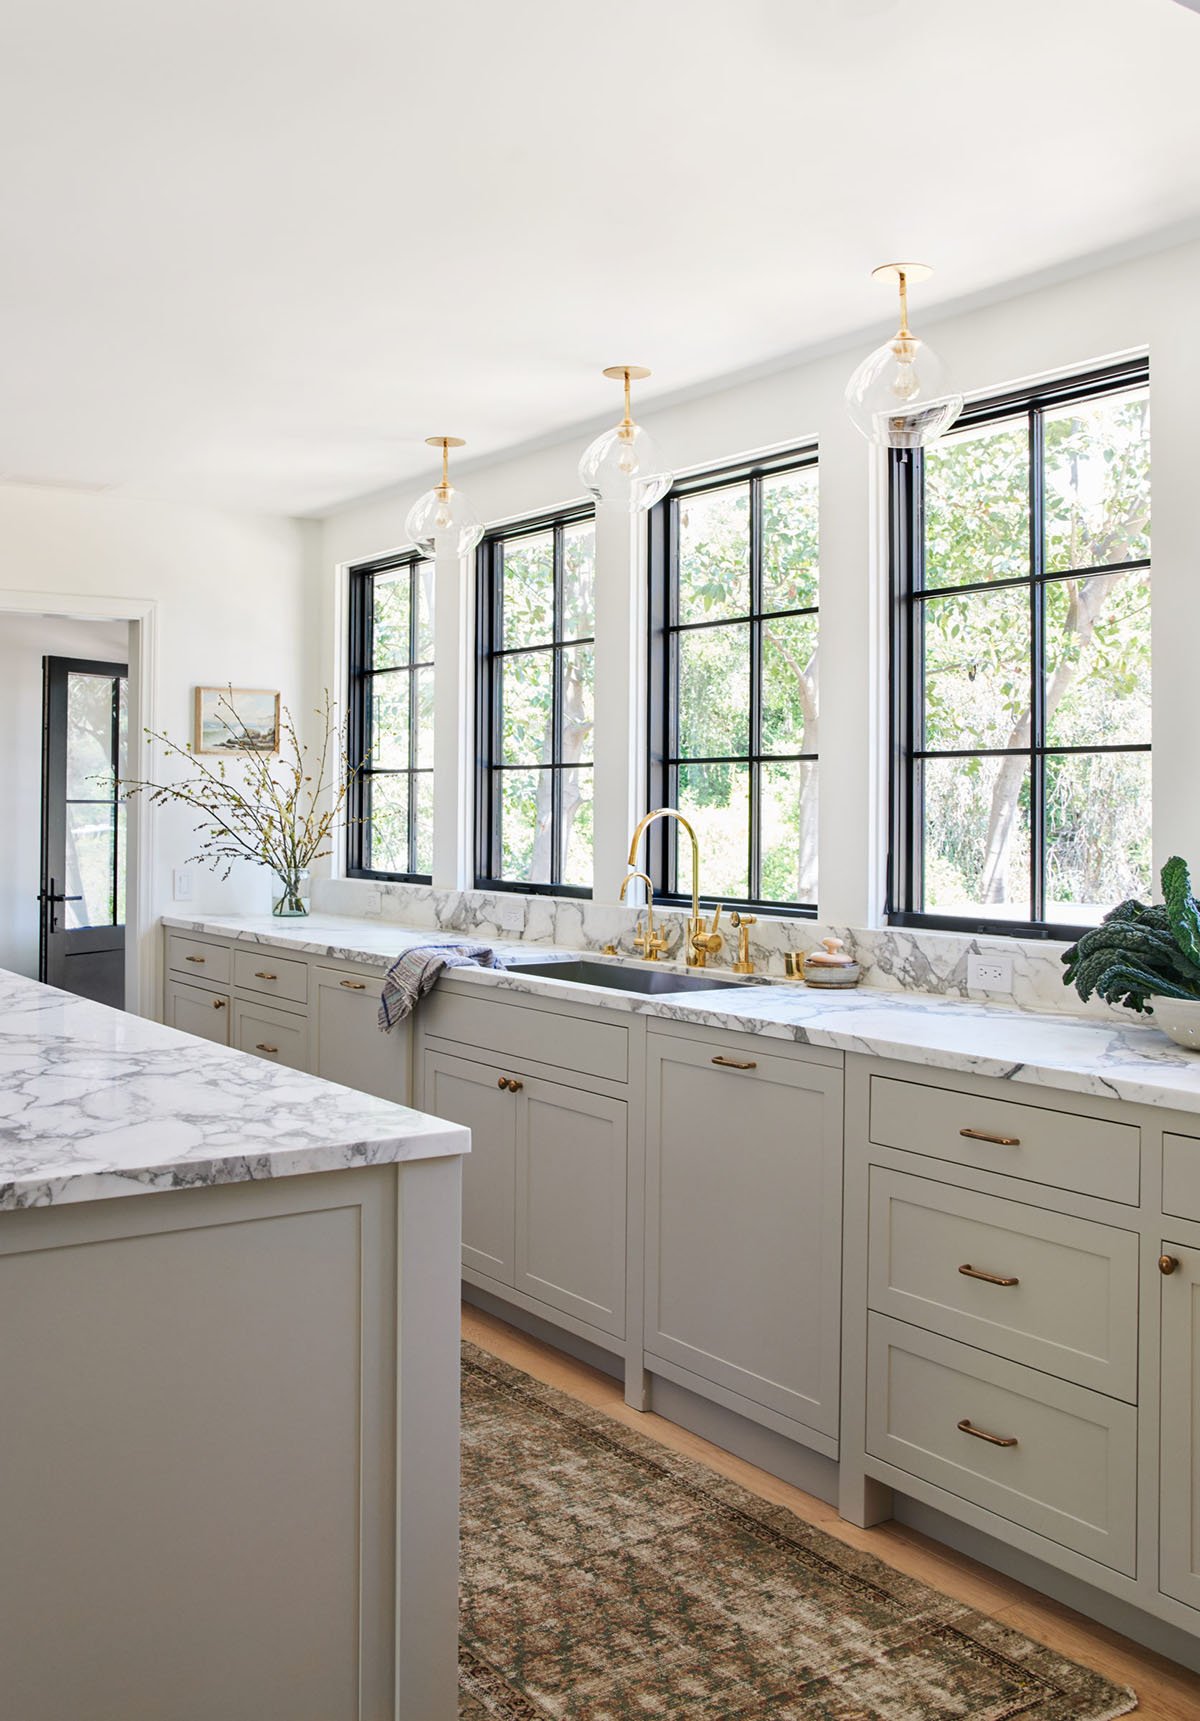 Dunn Edwards Shade kitchen cabinets with gold fixtures. Lots of natural light and marble counters.